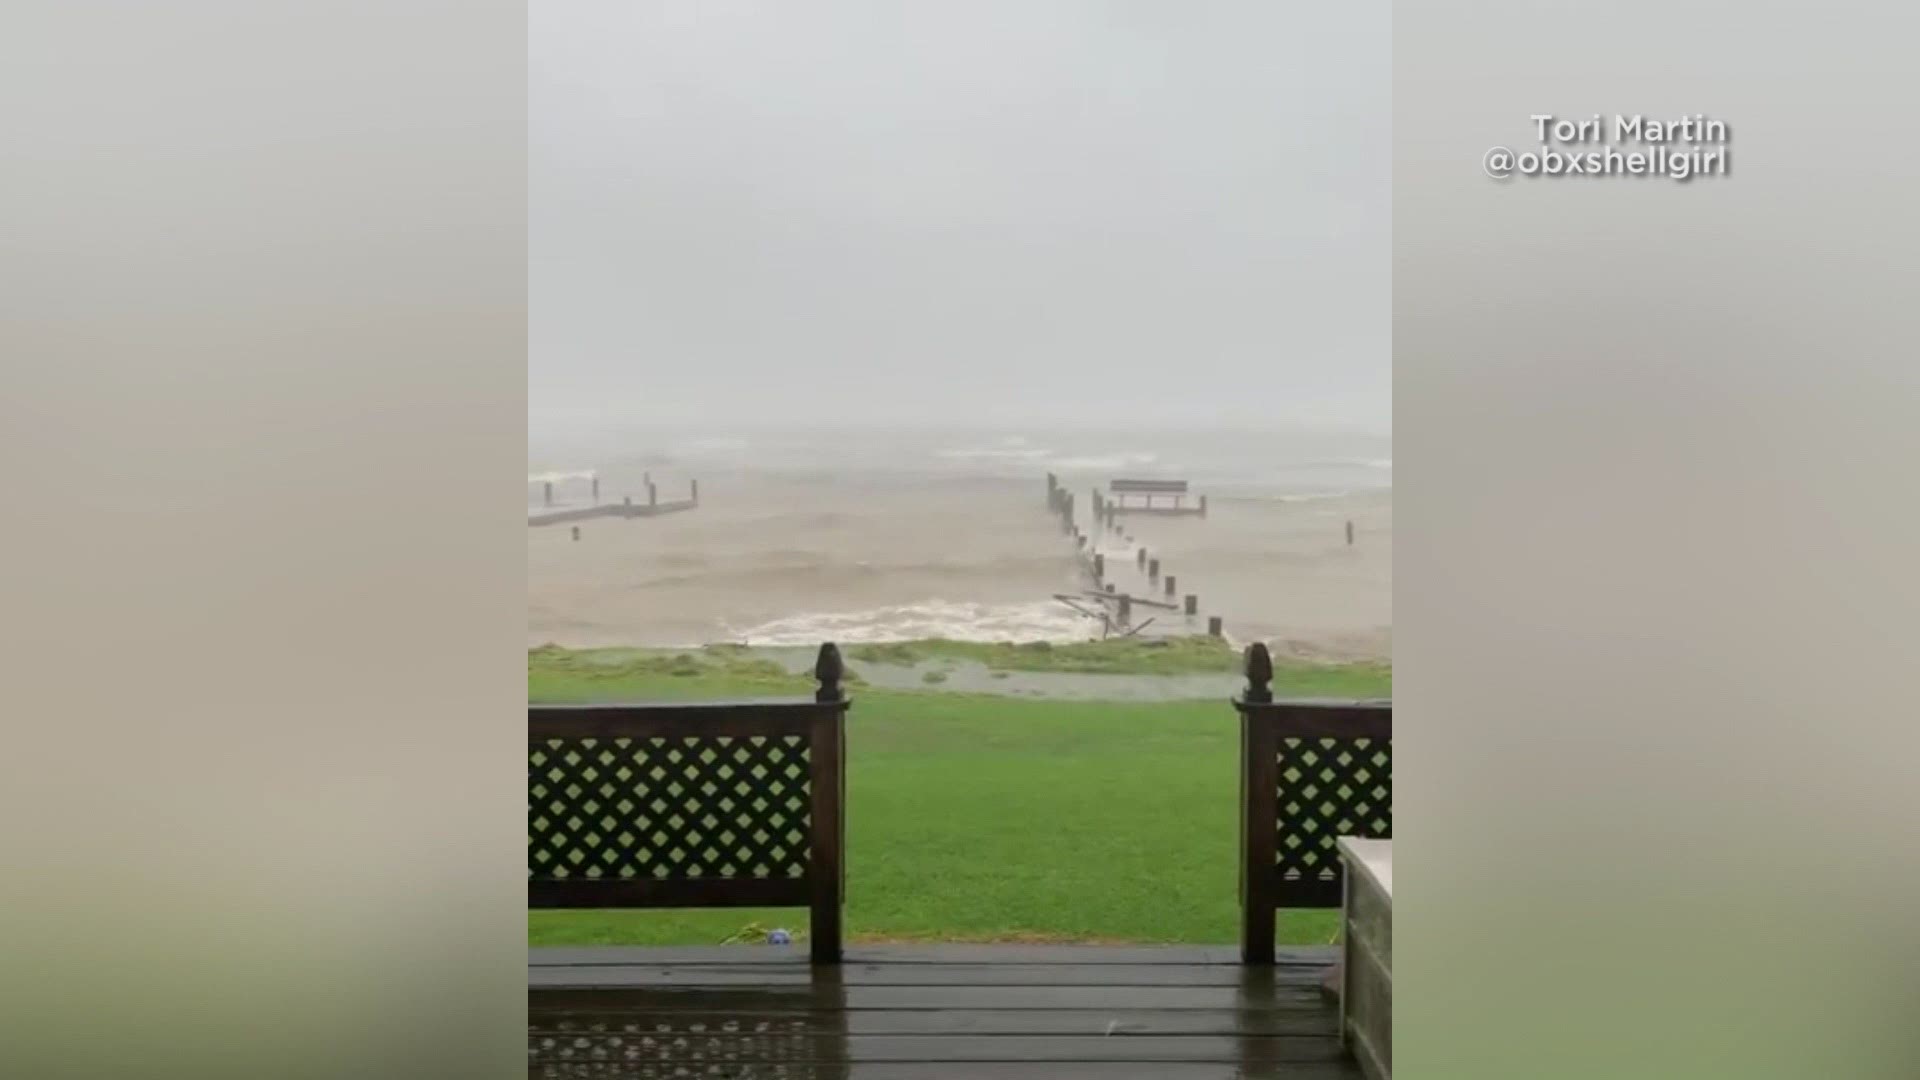 Hurricane Dorian's wind and rain bands are slamming the Outer Banks Friday morning (9/6). The storm is extremely close to making a possible landfall on Cape Hatteras, North Carolina. In Corolla, on the Outer Banks, Tori Martin filmed the strong wind and rain on the beach as seen from the porch of her house early Friday.